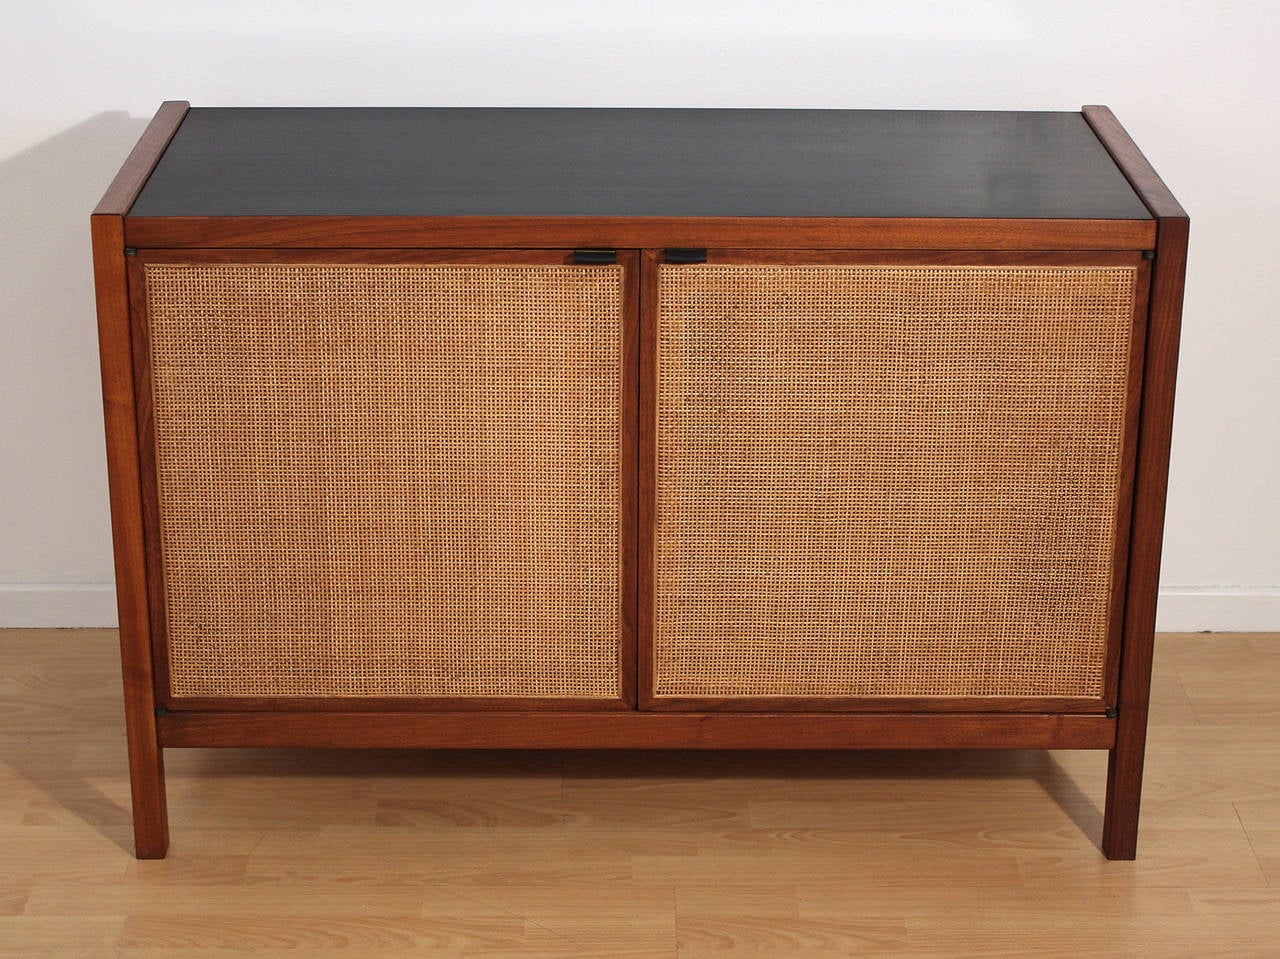 Small-scale credenza or cabinet made of solid walnut with cane doors, leather pulls and smooth black laminate top designed by Florence Knoll for Knoll Associates.

Excellent condition.